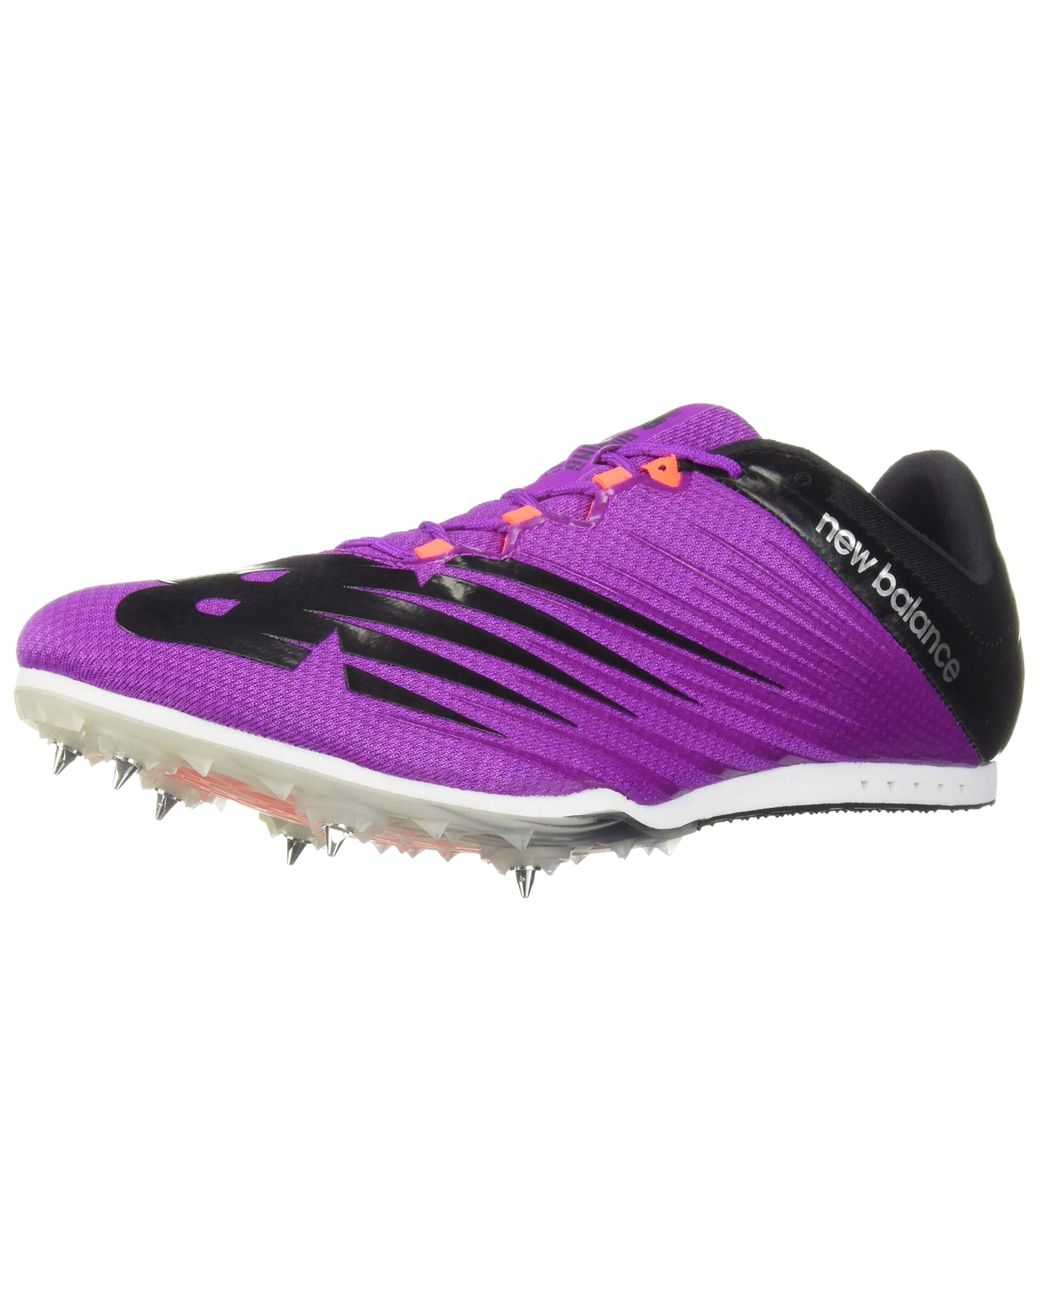 New Balance Middle Distance 500 V6 Running Shoe in Purple - Save 58% - Lyst